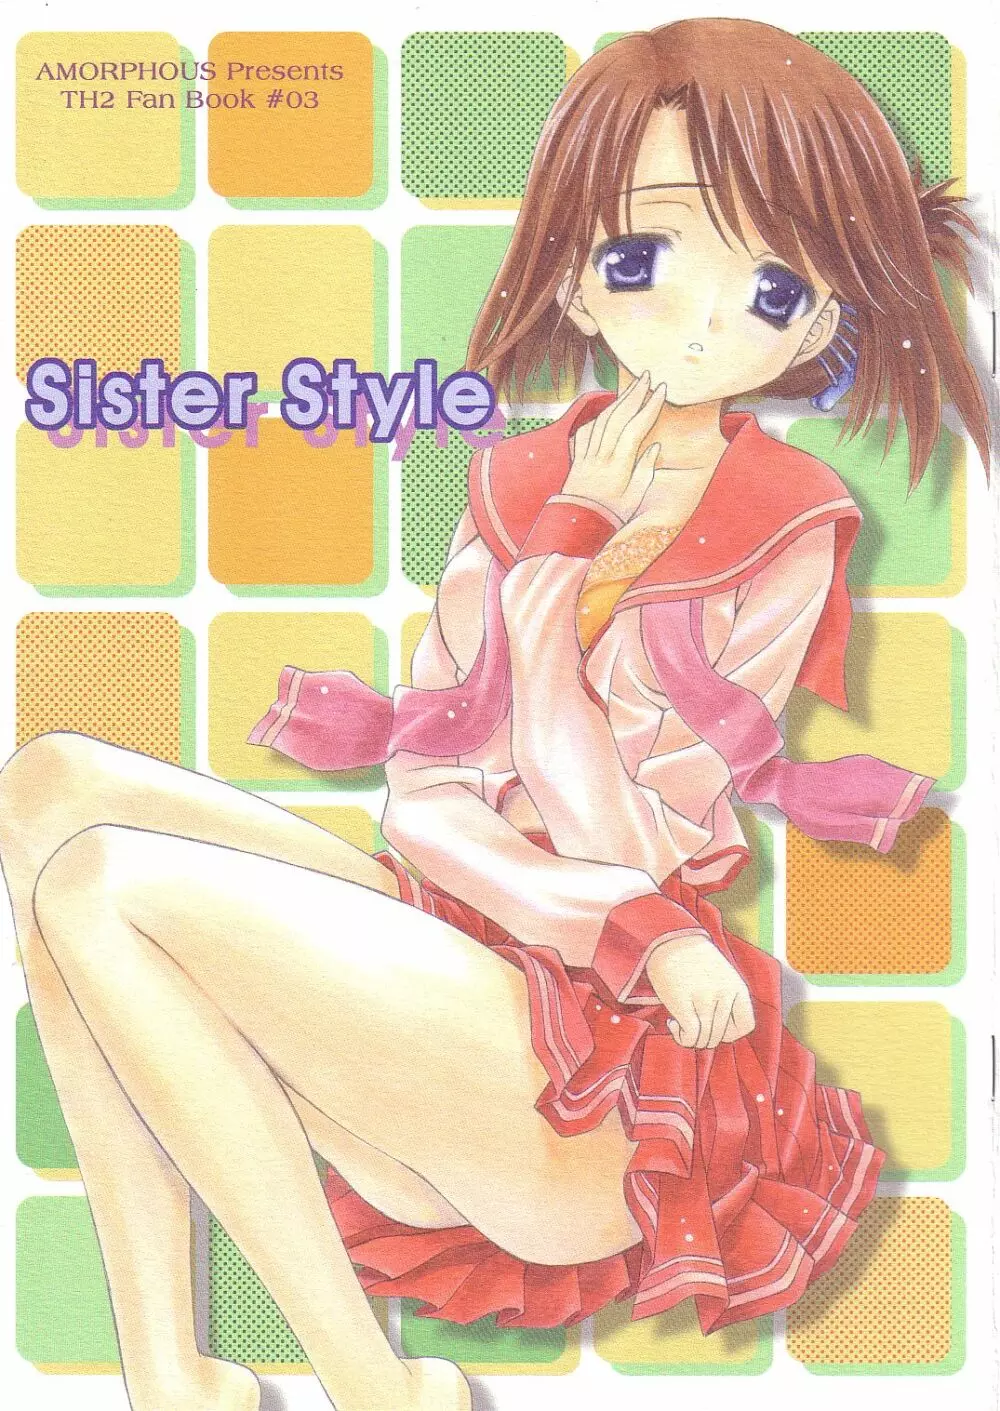 Sister Style